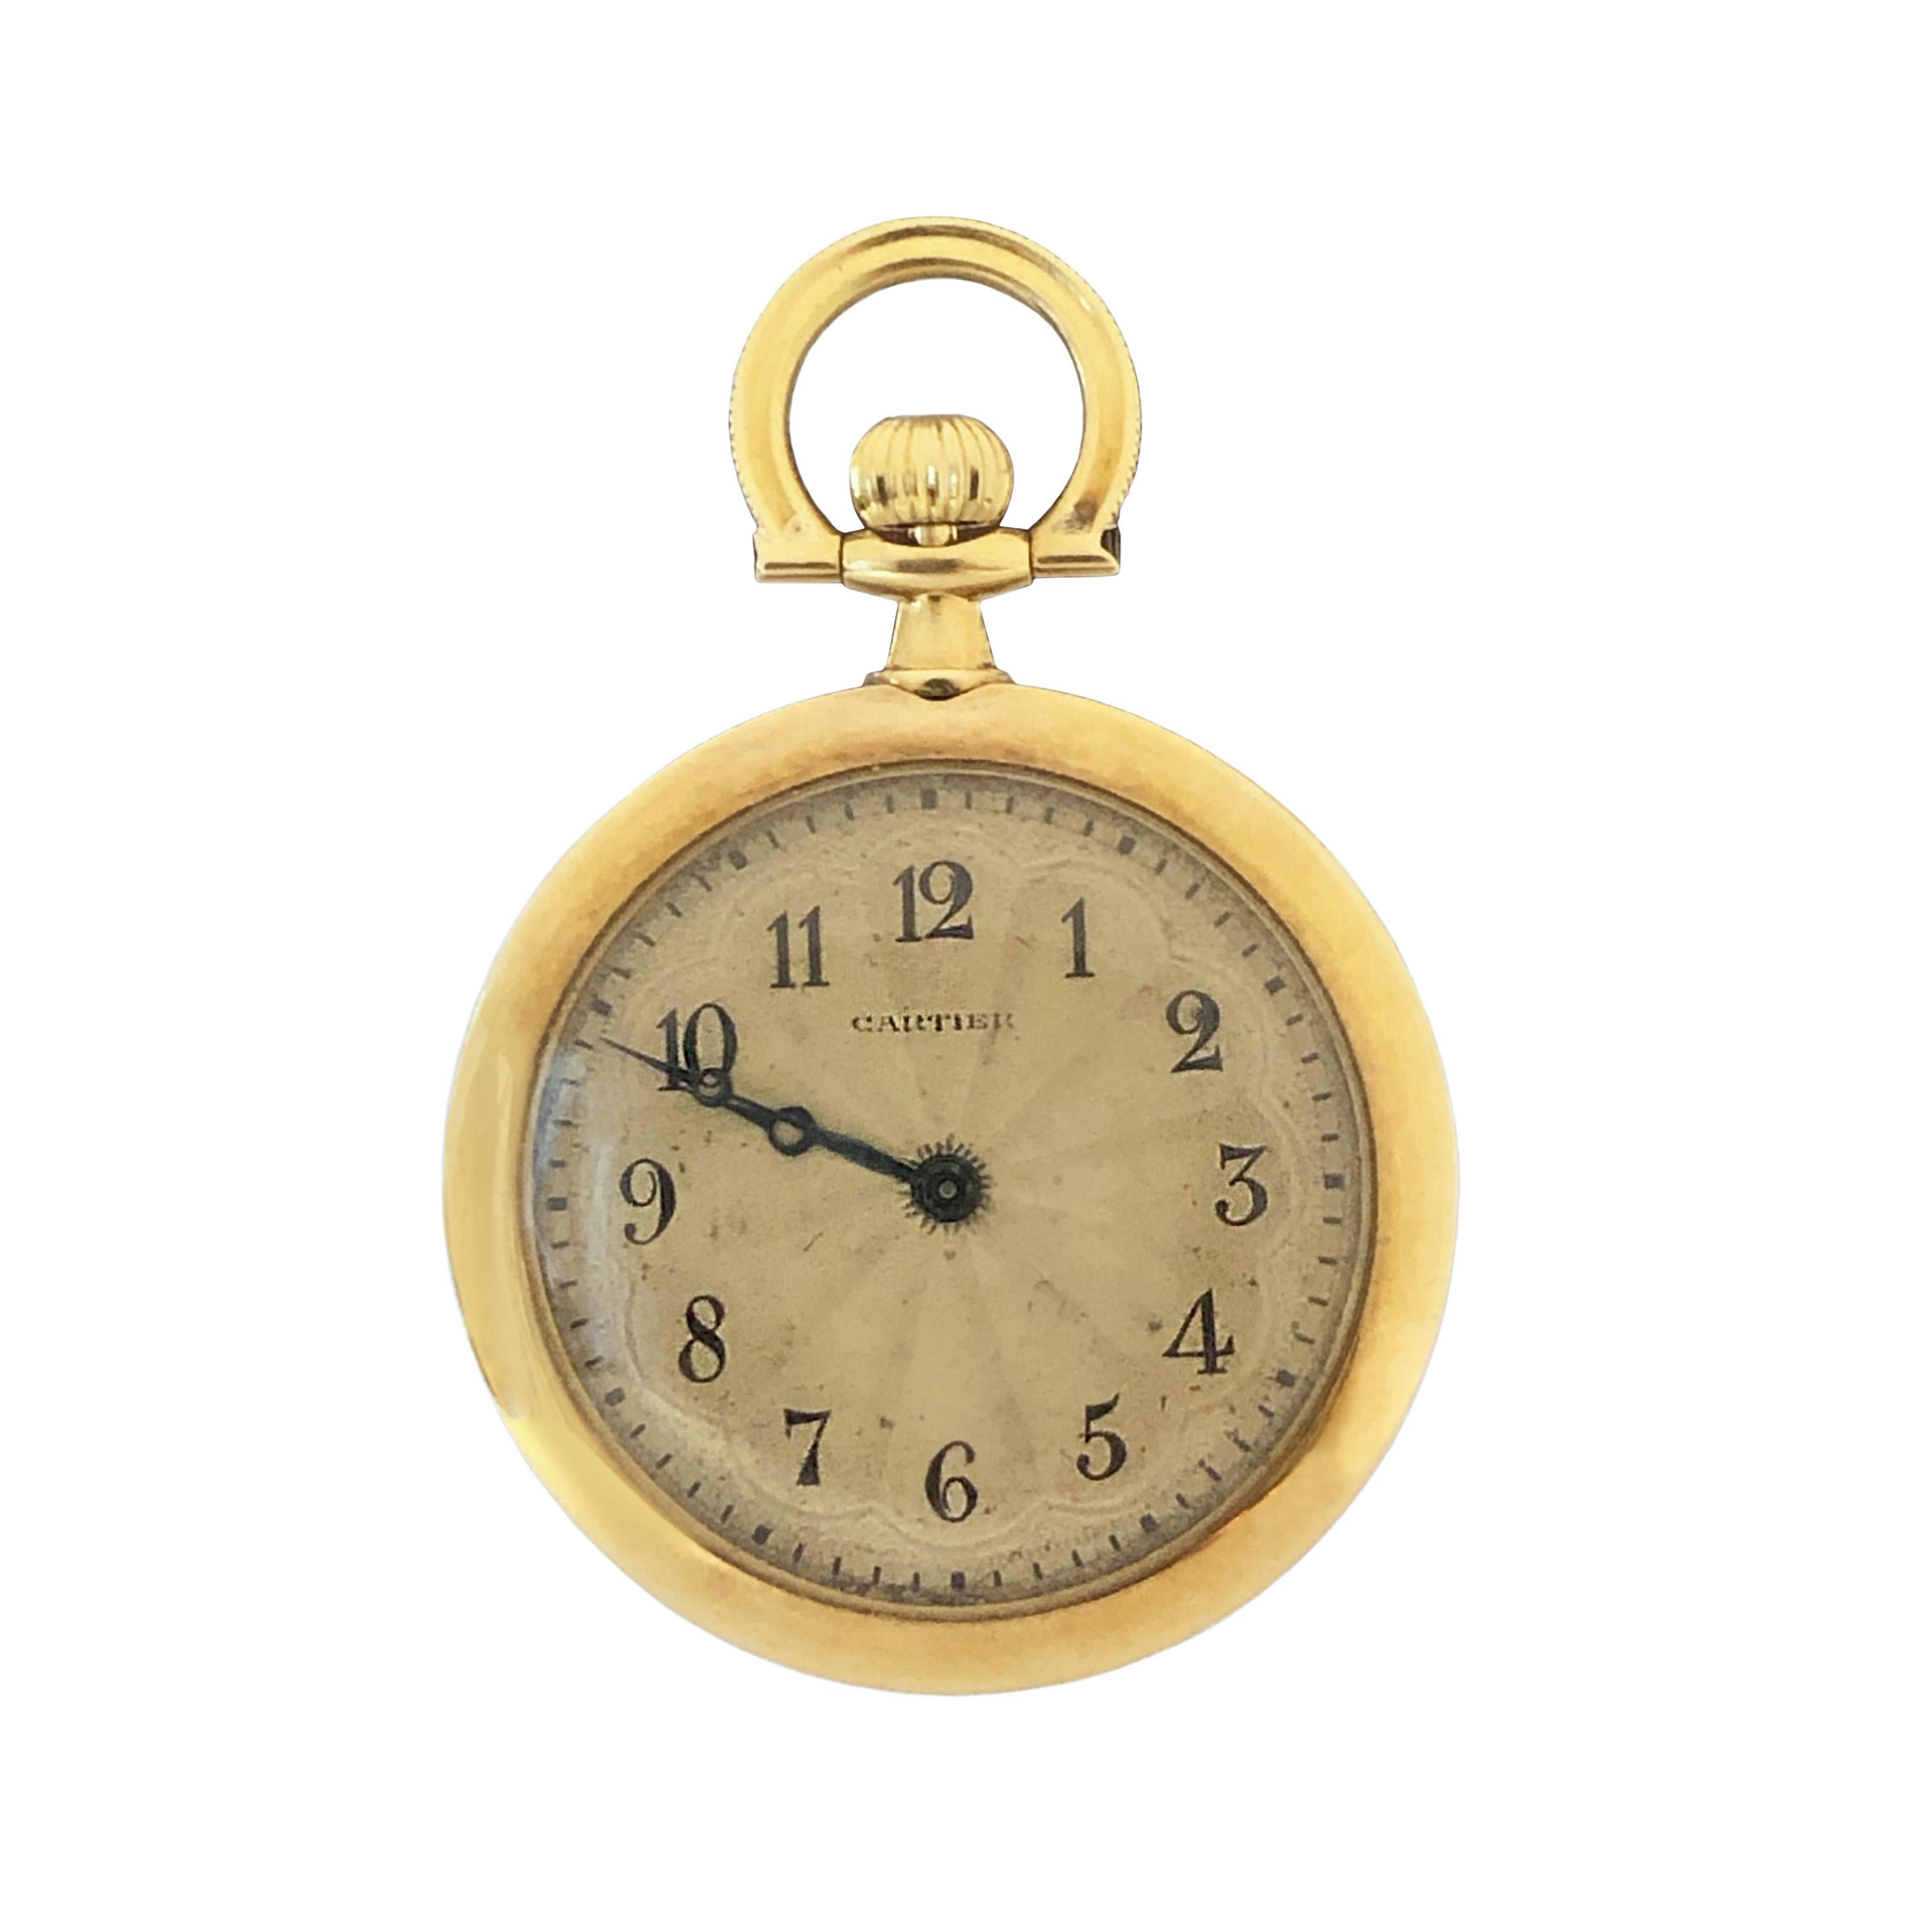 Circa 1920s Cartier Ladies pendant watch, 27 M.M. 18K Yellow Gold 3 Piece case with with Platinum and Enamel and further set with several Rose cut Diamonds and a Natural Pearl.  17 Jewel EWC, European Watch & Clock manual wind nickel lever movement.